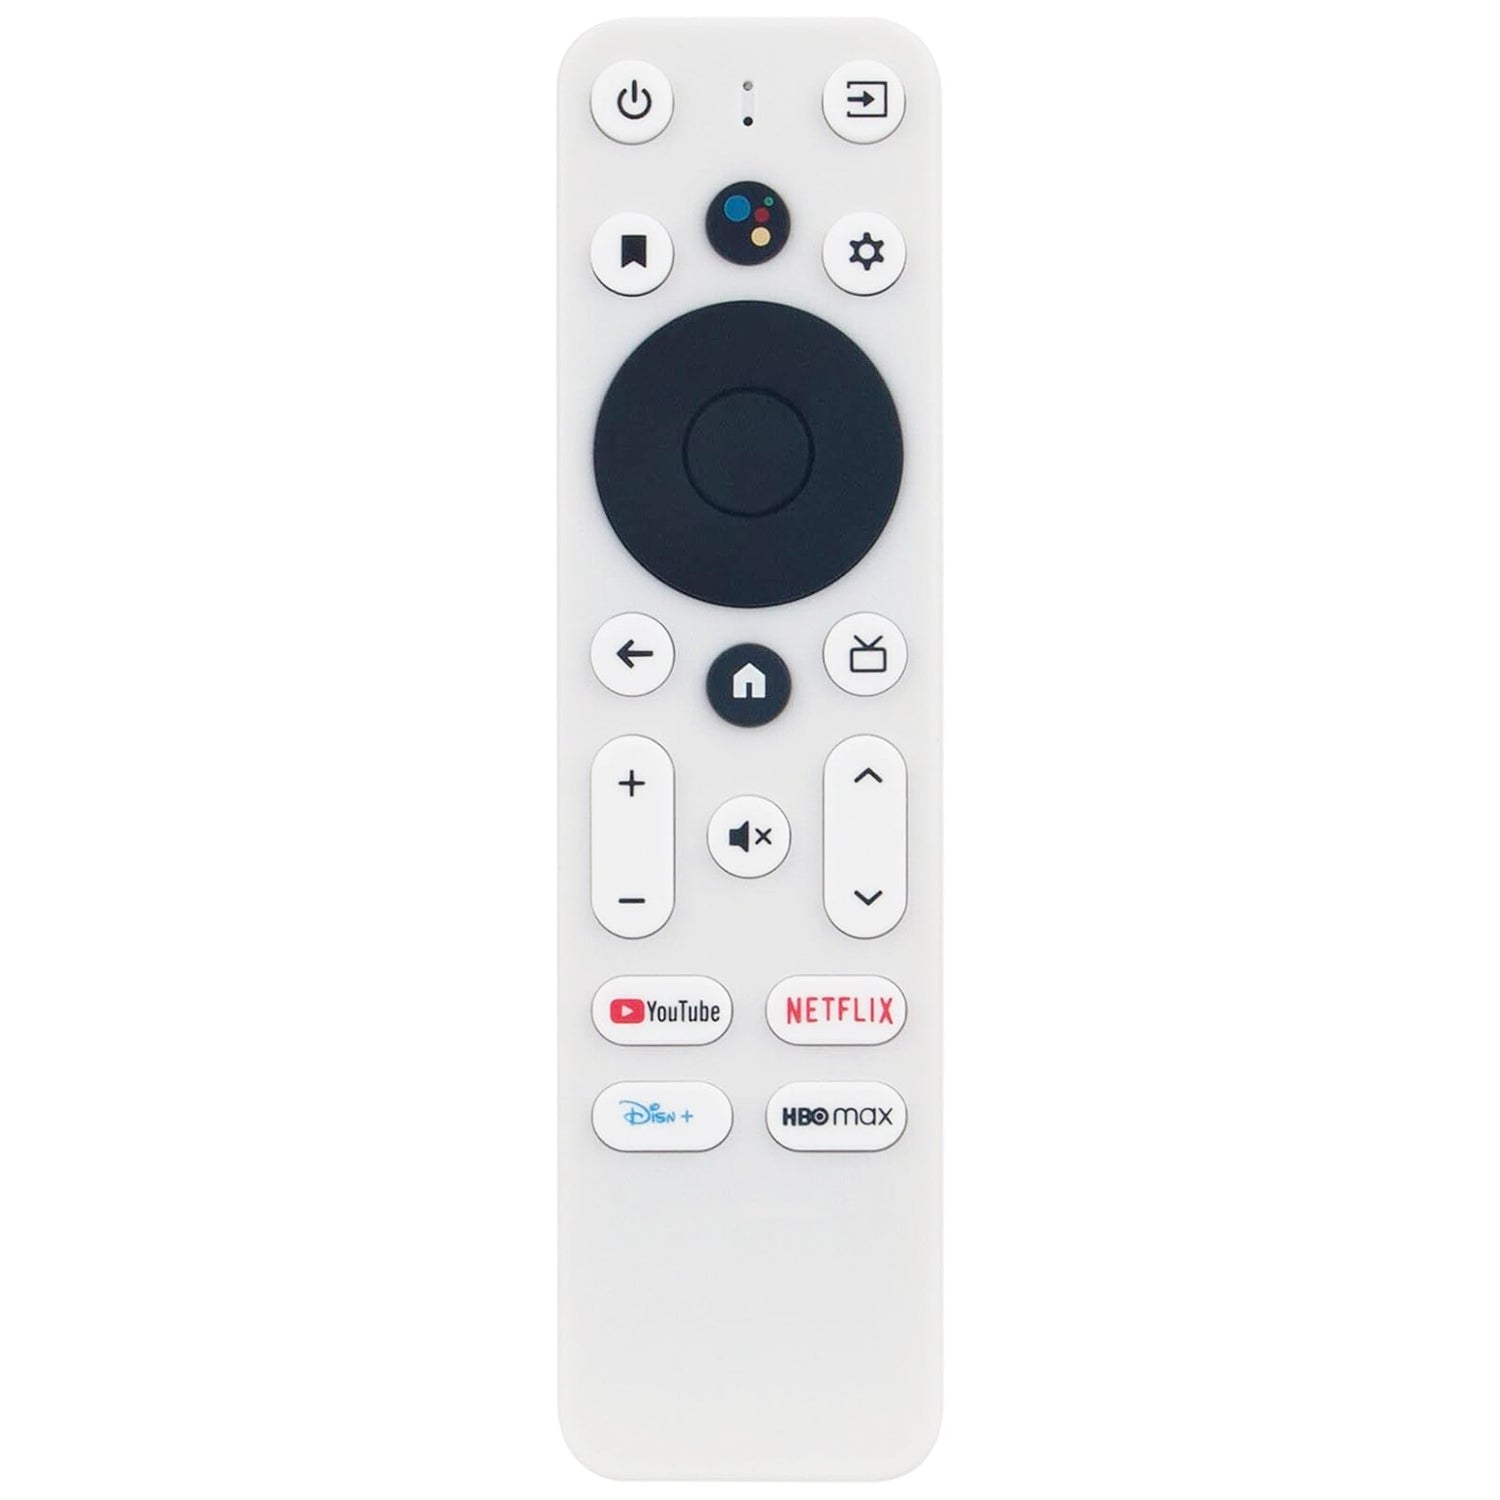 KM2 KM2 Plus Voice Remote Control Replacement for Onn Android TV 4K KD3 KD5 KP1